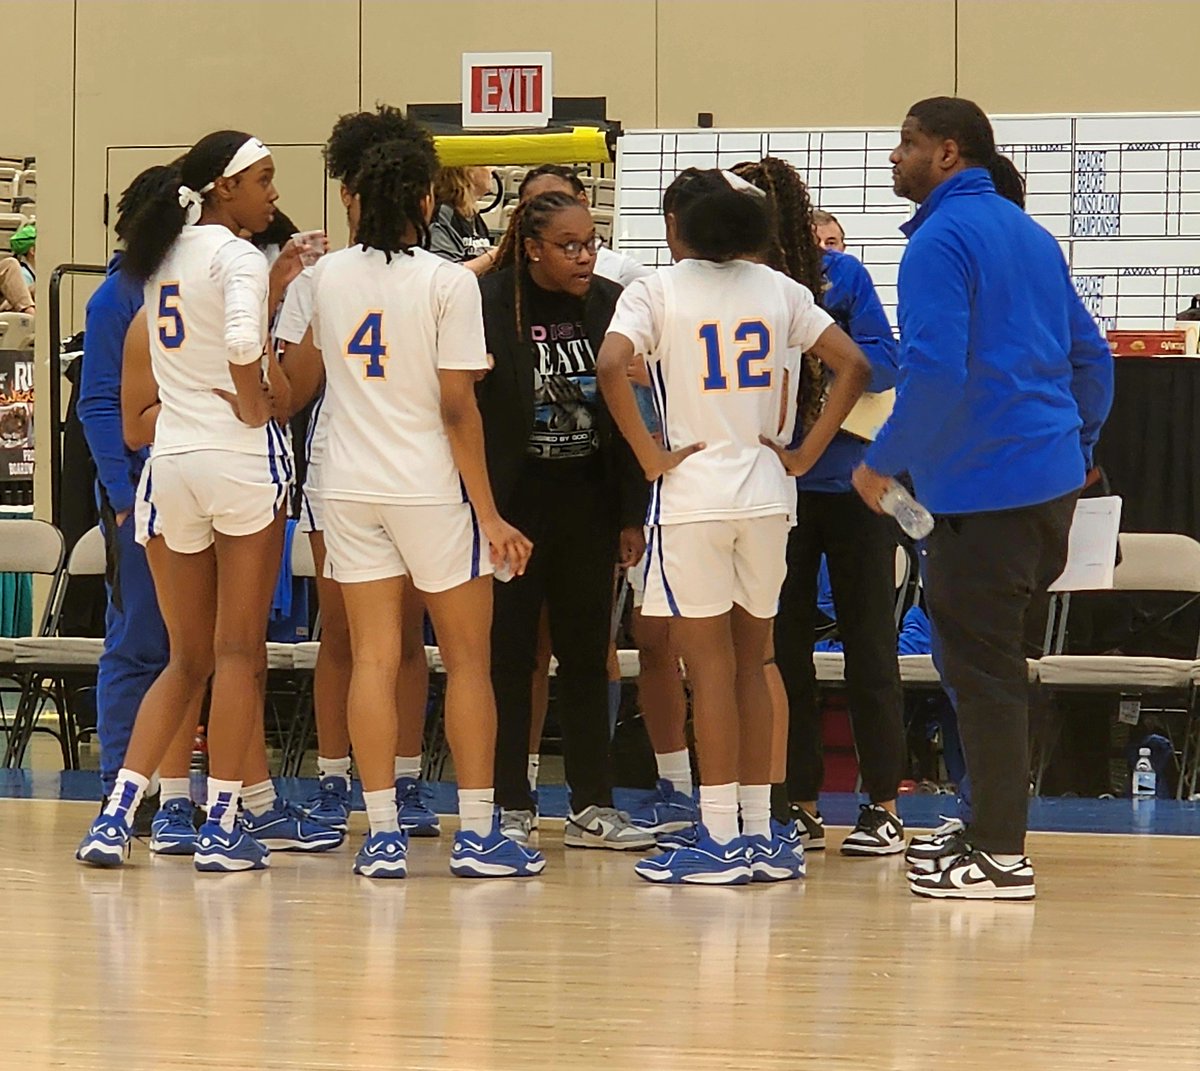 NJ Ladies Hoops 'HS & AAU COACH OF THE DAY' Often recognized & well Deserved Meet SHERIKA SALMON Head Coach @Tcabballcoach (Trenton Catholic Prep) & Director @TEAMBBA_ This young lady is writing a heck of a story @CoachBobFusik @GthingBBall @NoBoyzAllowedBB @AlfordDonn68432